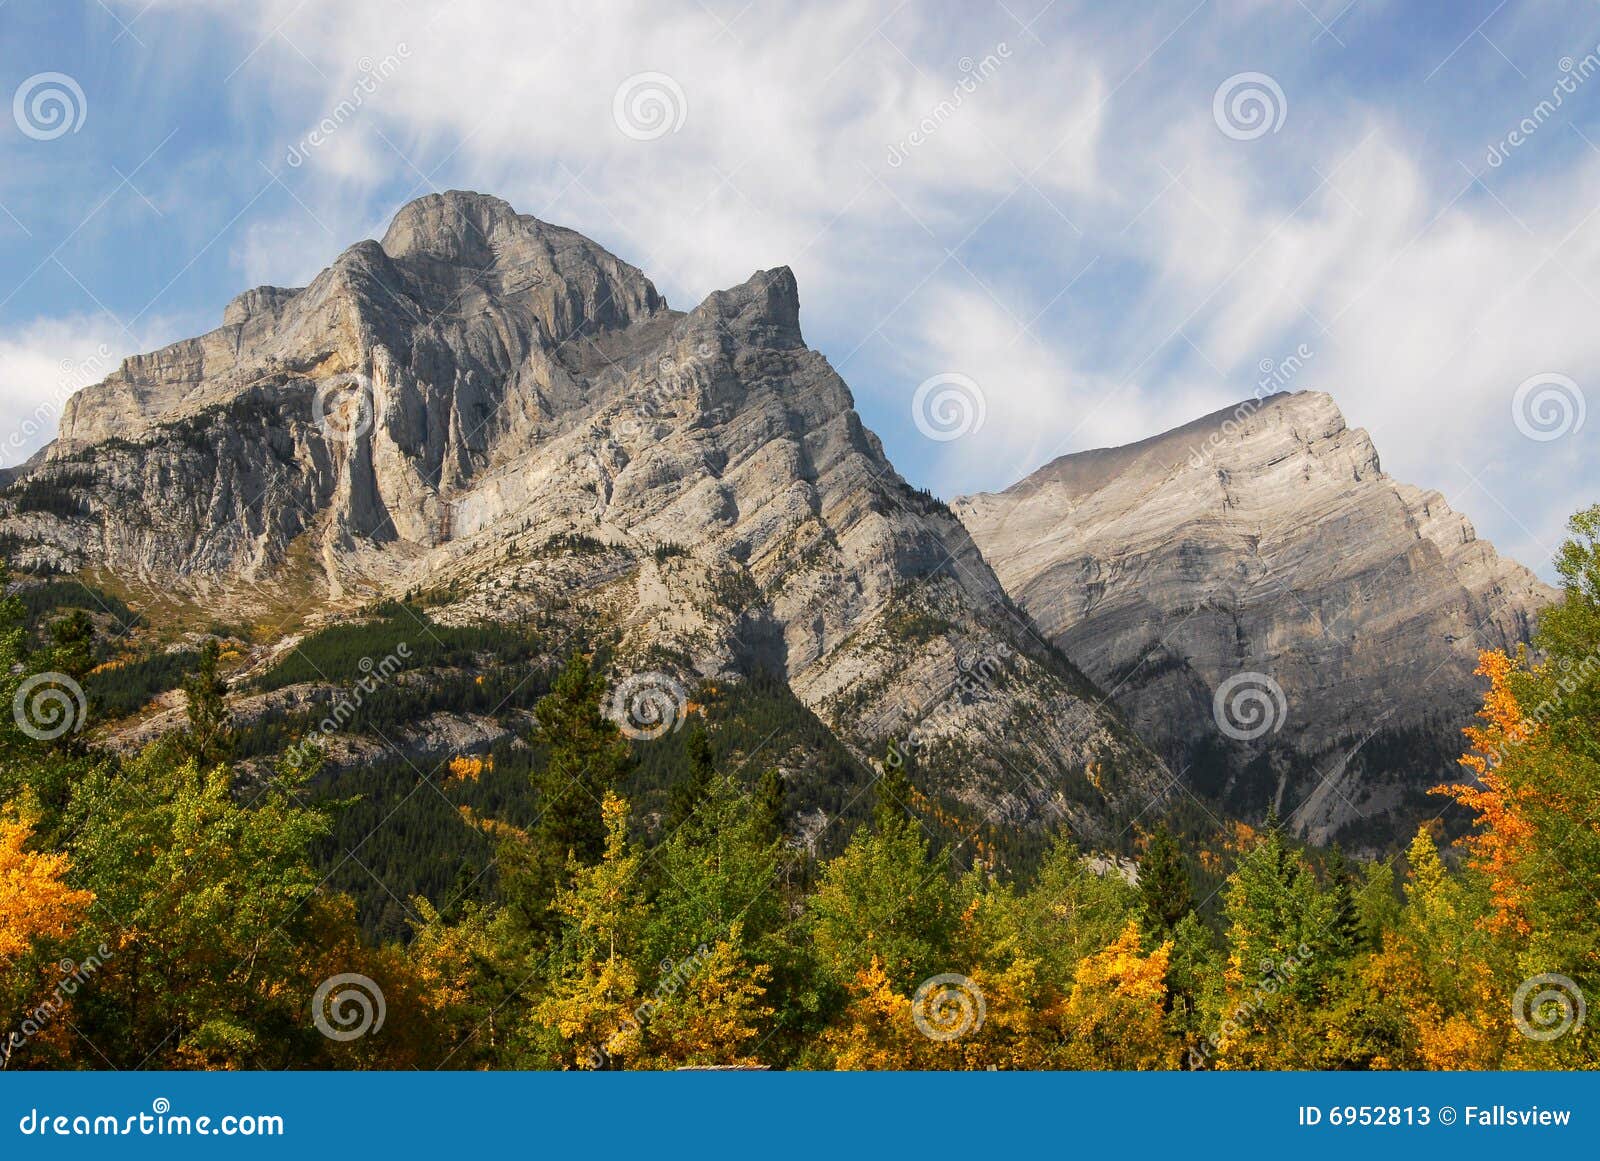 rocky mountains and forests